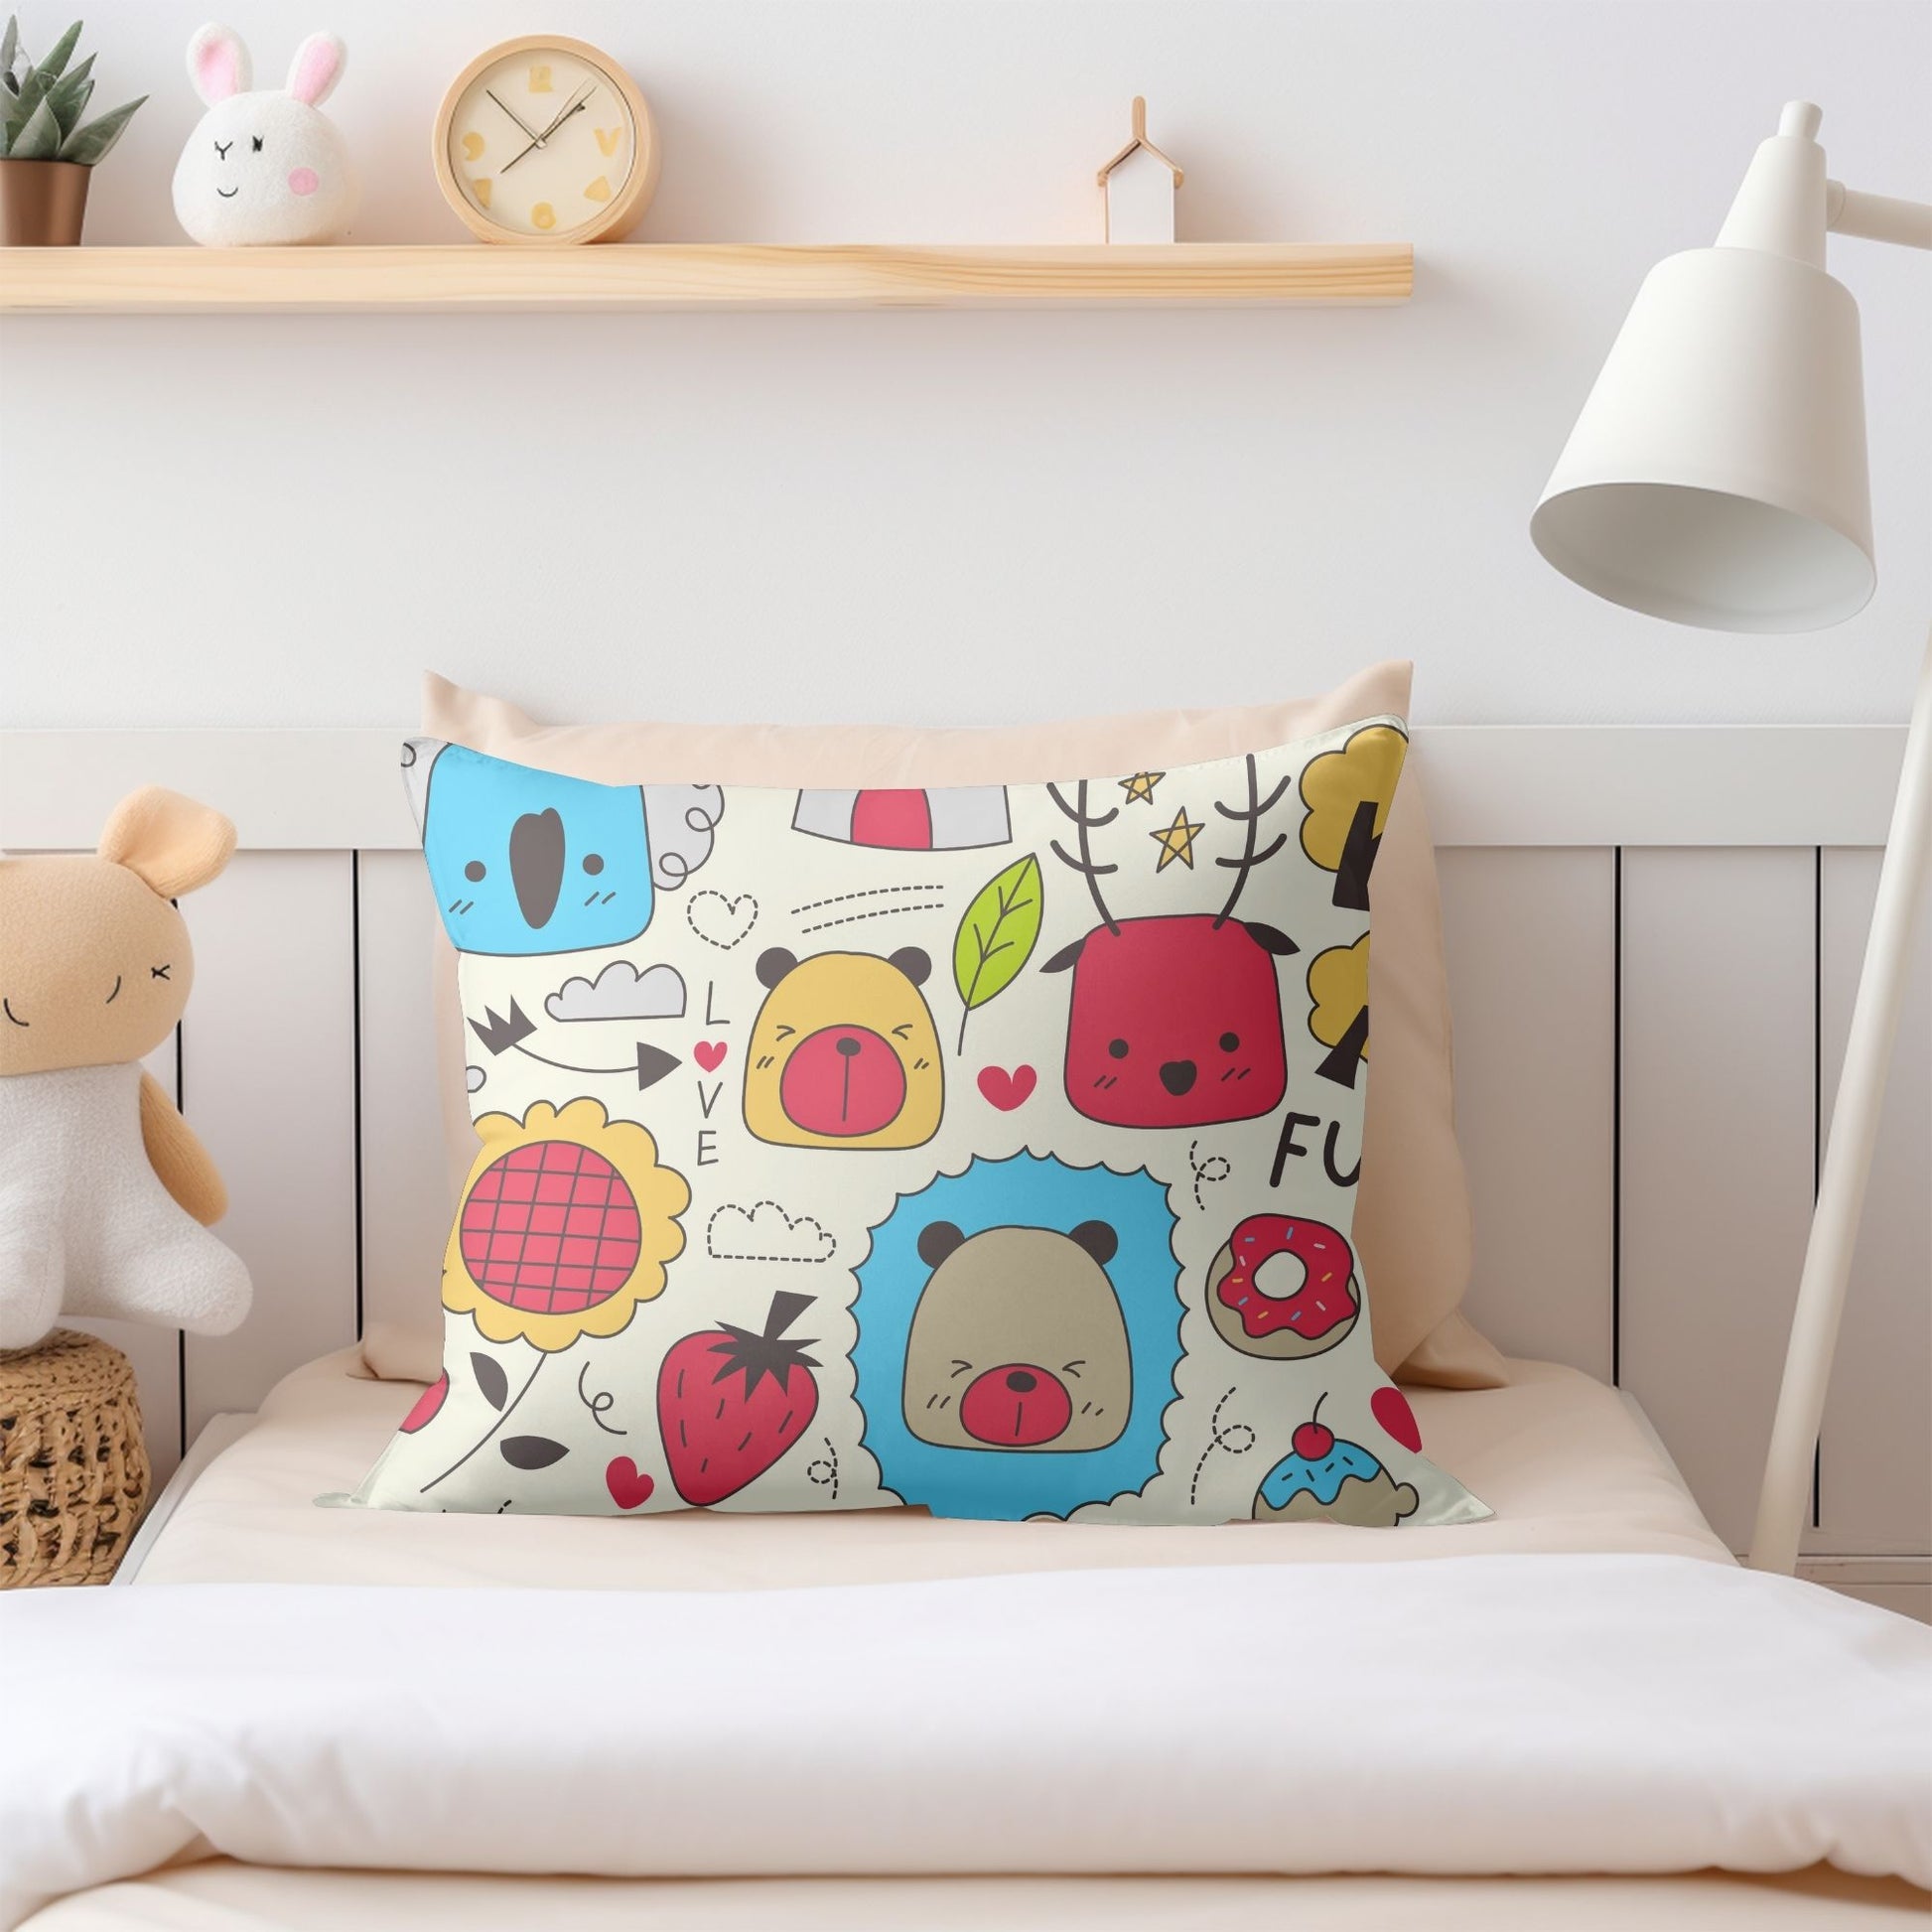 Cozy pillow with delightful animal patterns for children's comfort.